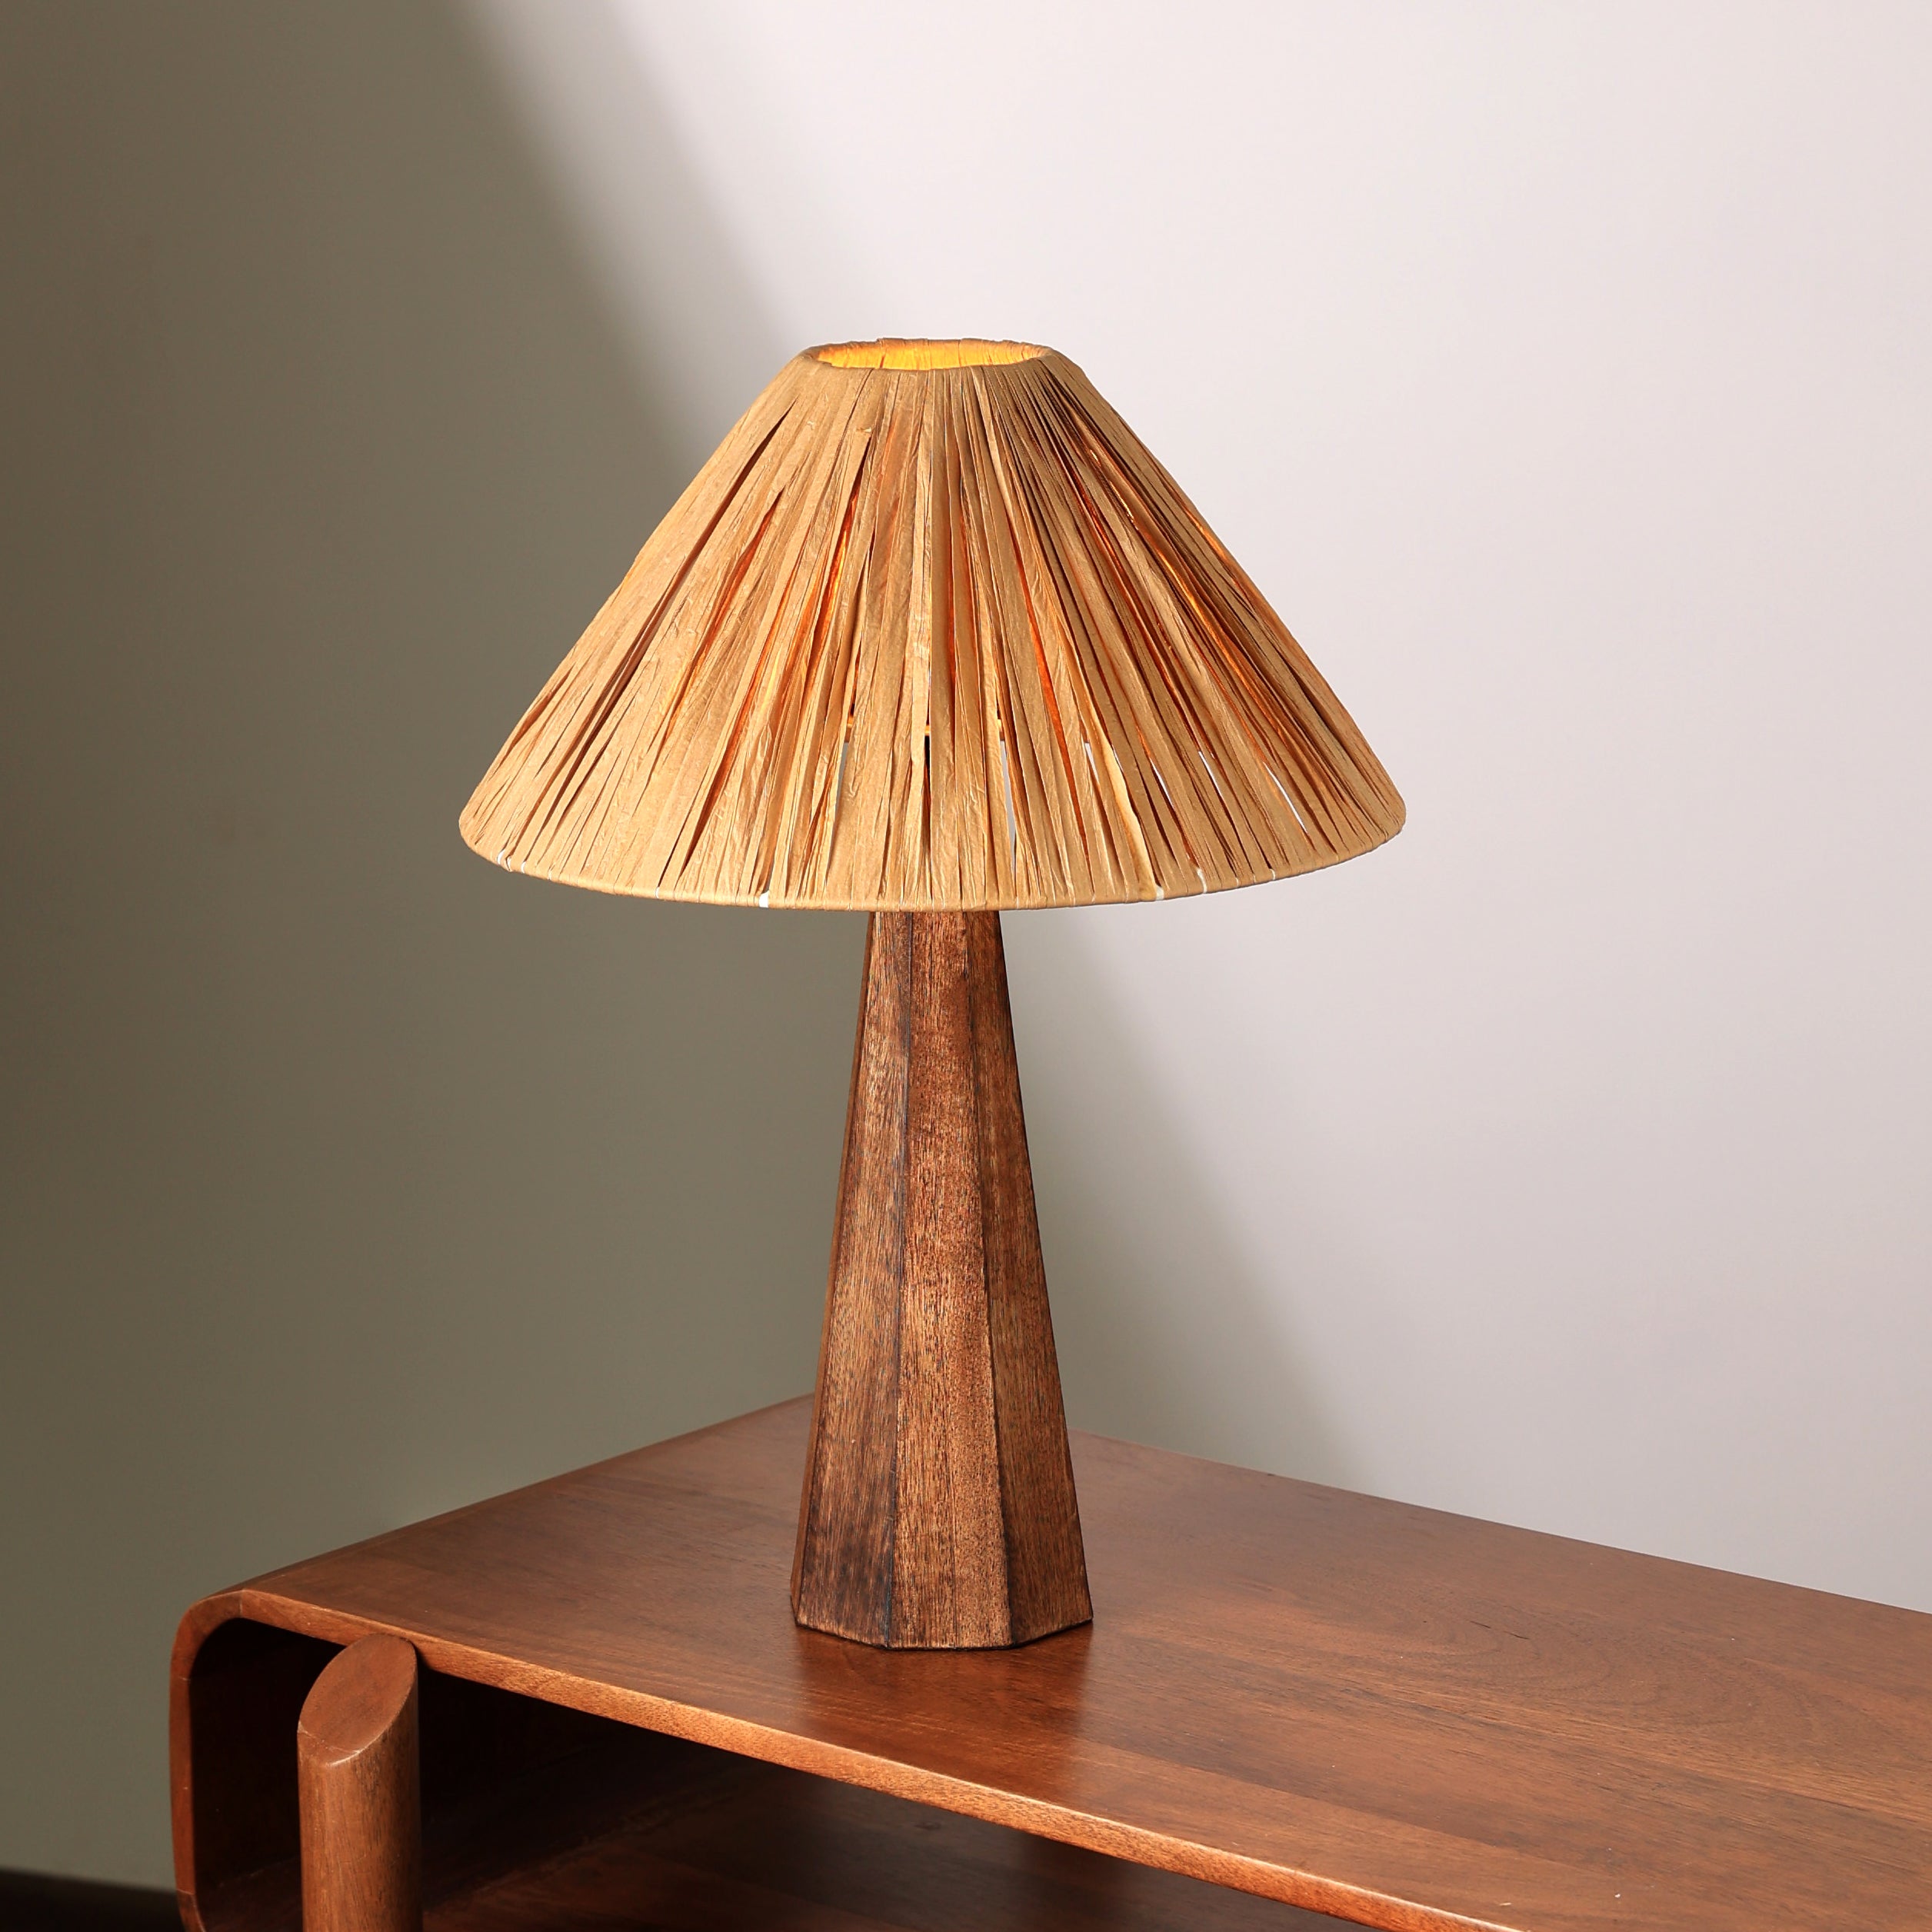 HARMONY TABLE LAMP - RAFFIA, NATURAL WOOD, PERFECT DESK LAMP FOR EARTHY SPACES